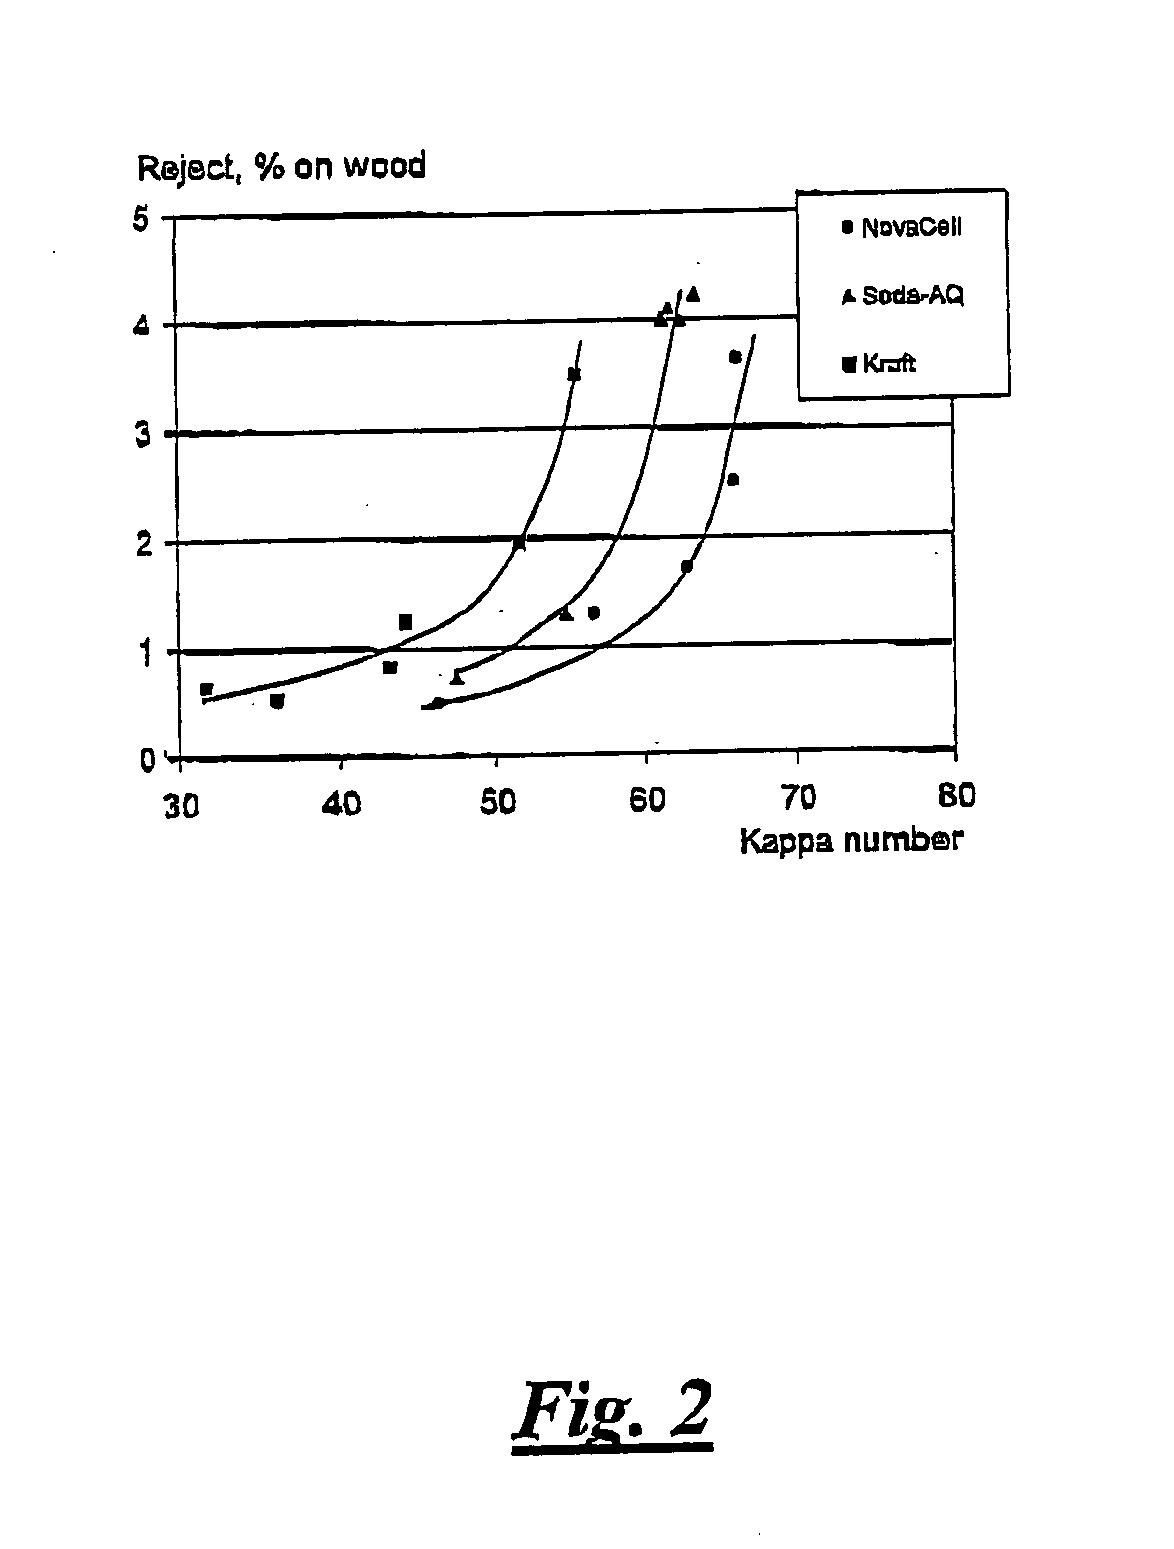 Alkaline process for the manufacturing of pulp using alkali metaborate as buffering alkali